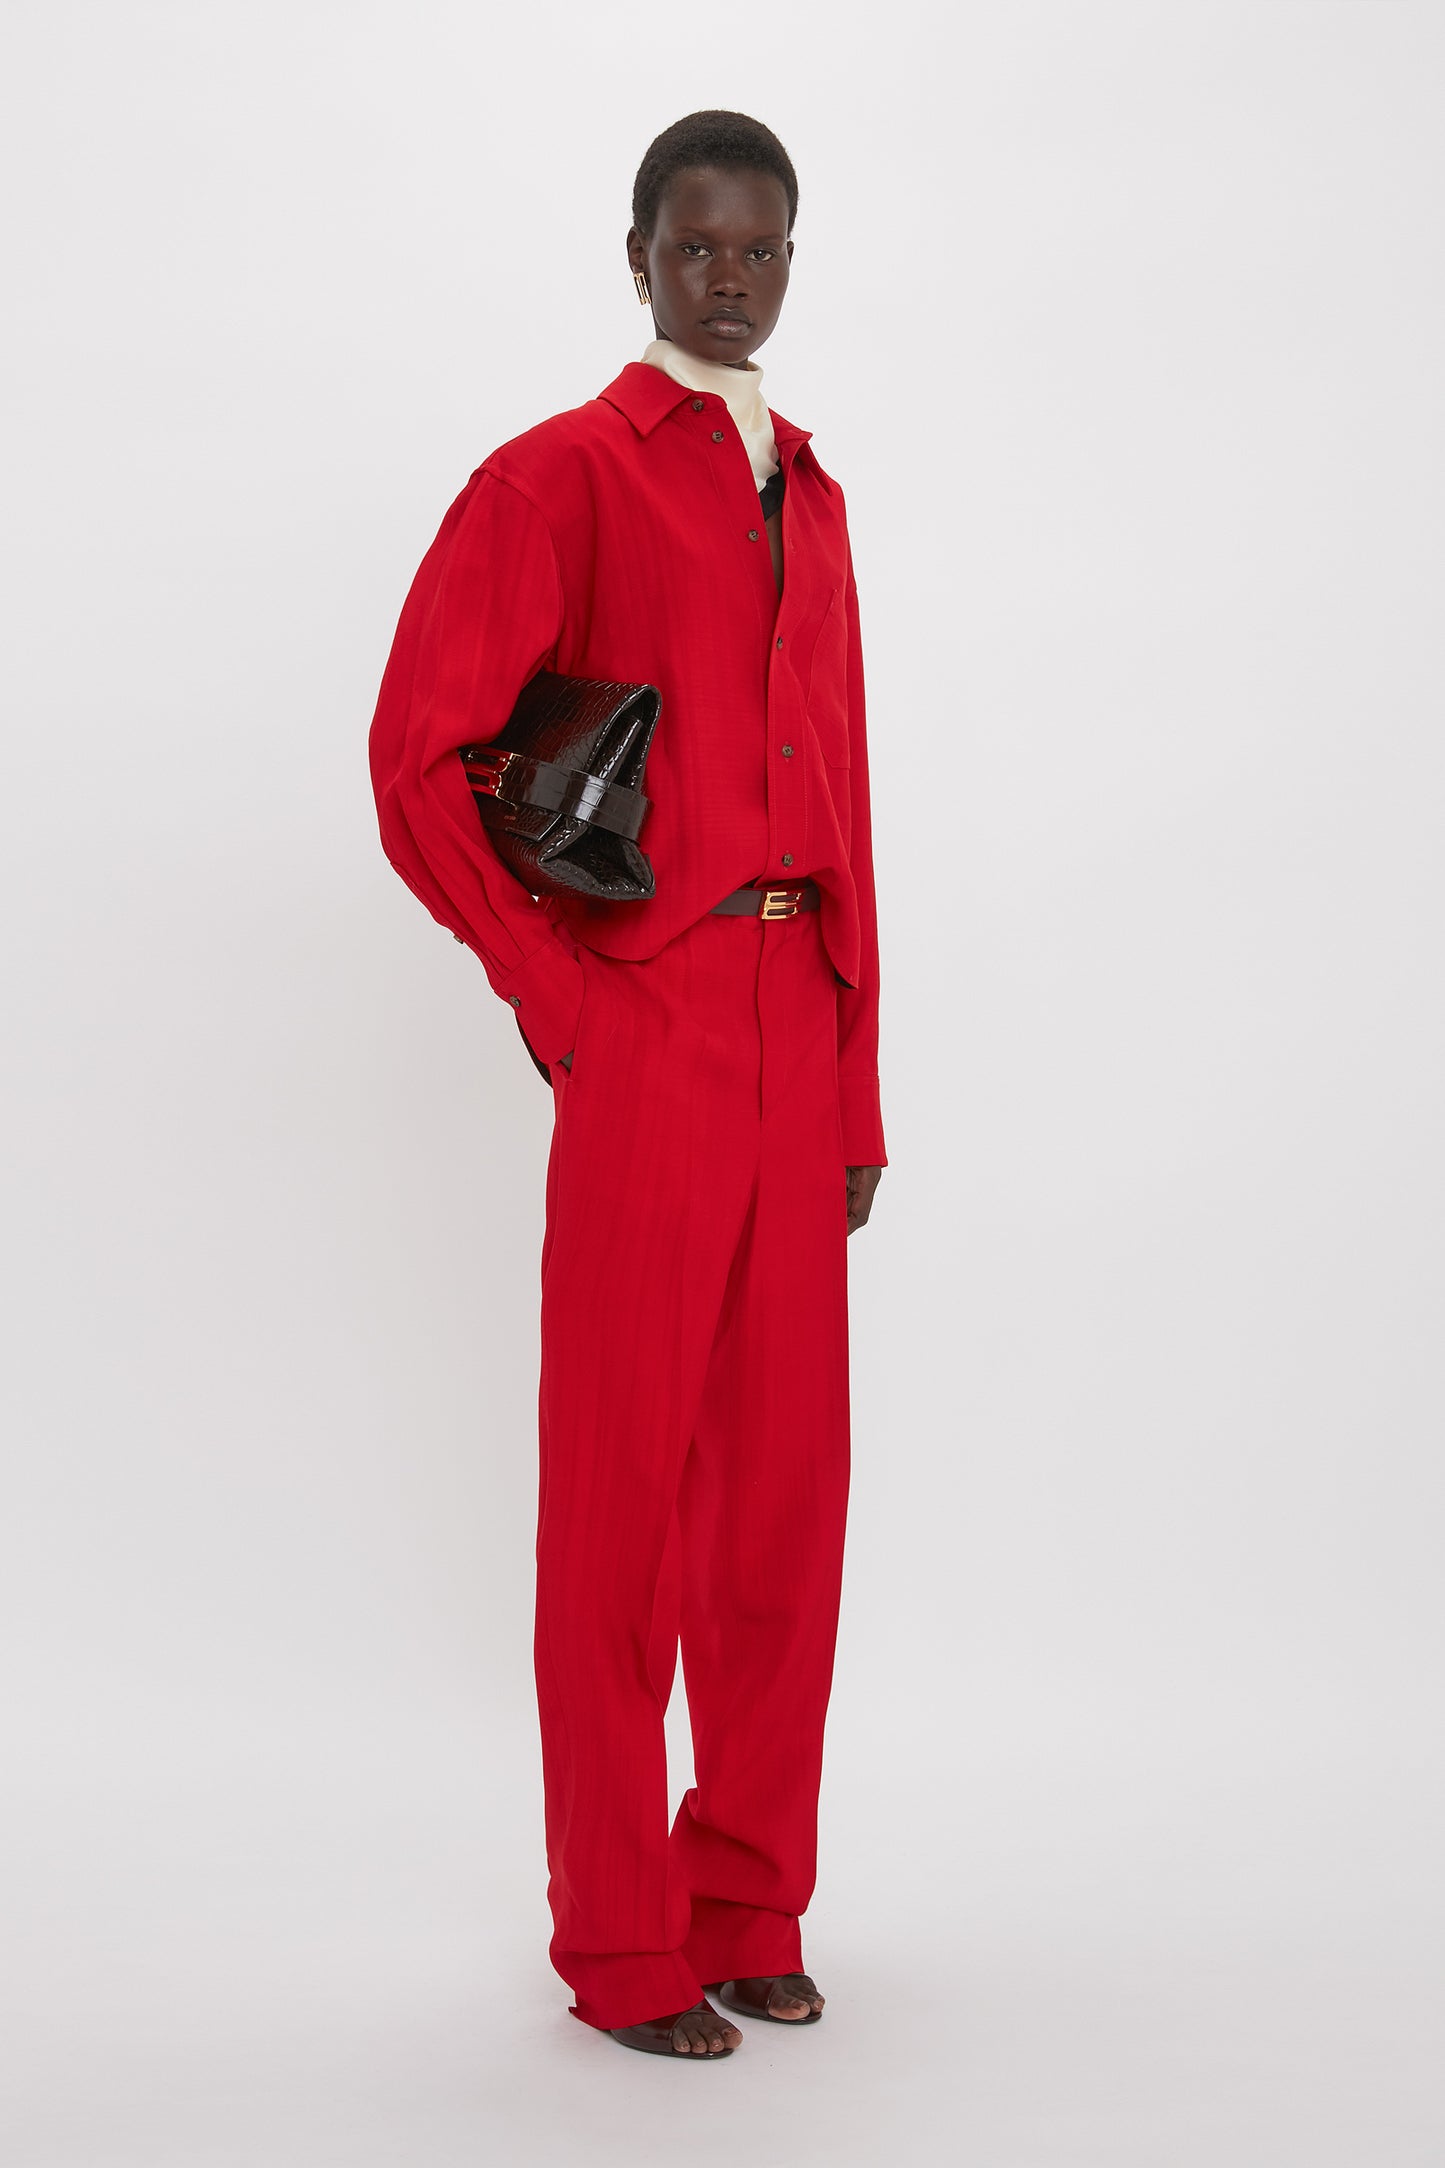 Person wearing a red, waist-defining **Cropped Long Sleeve Shirt In Carmine** by **Victoria Beckham** and matching wide-leg trousers, holding a black handbag, standing against a plain white background.